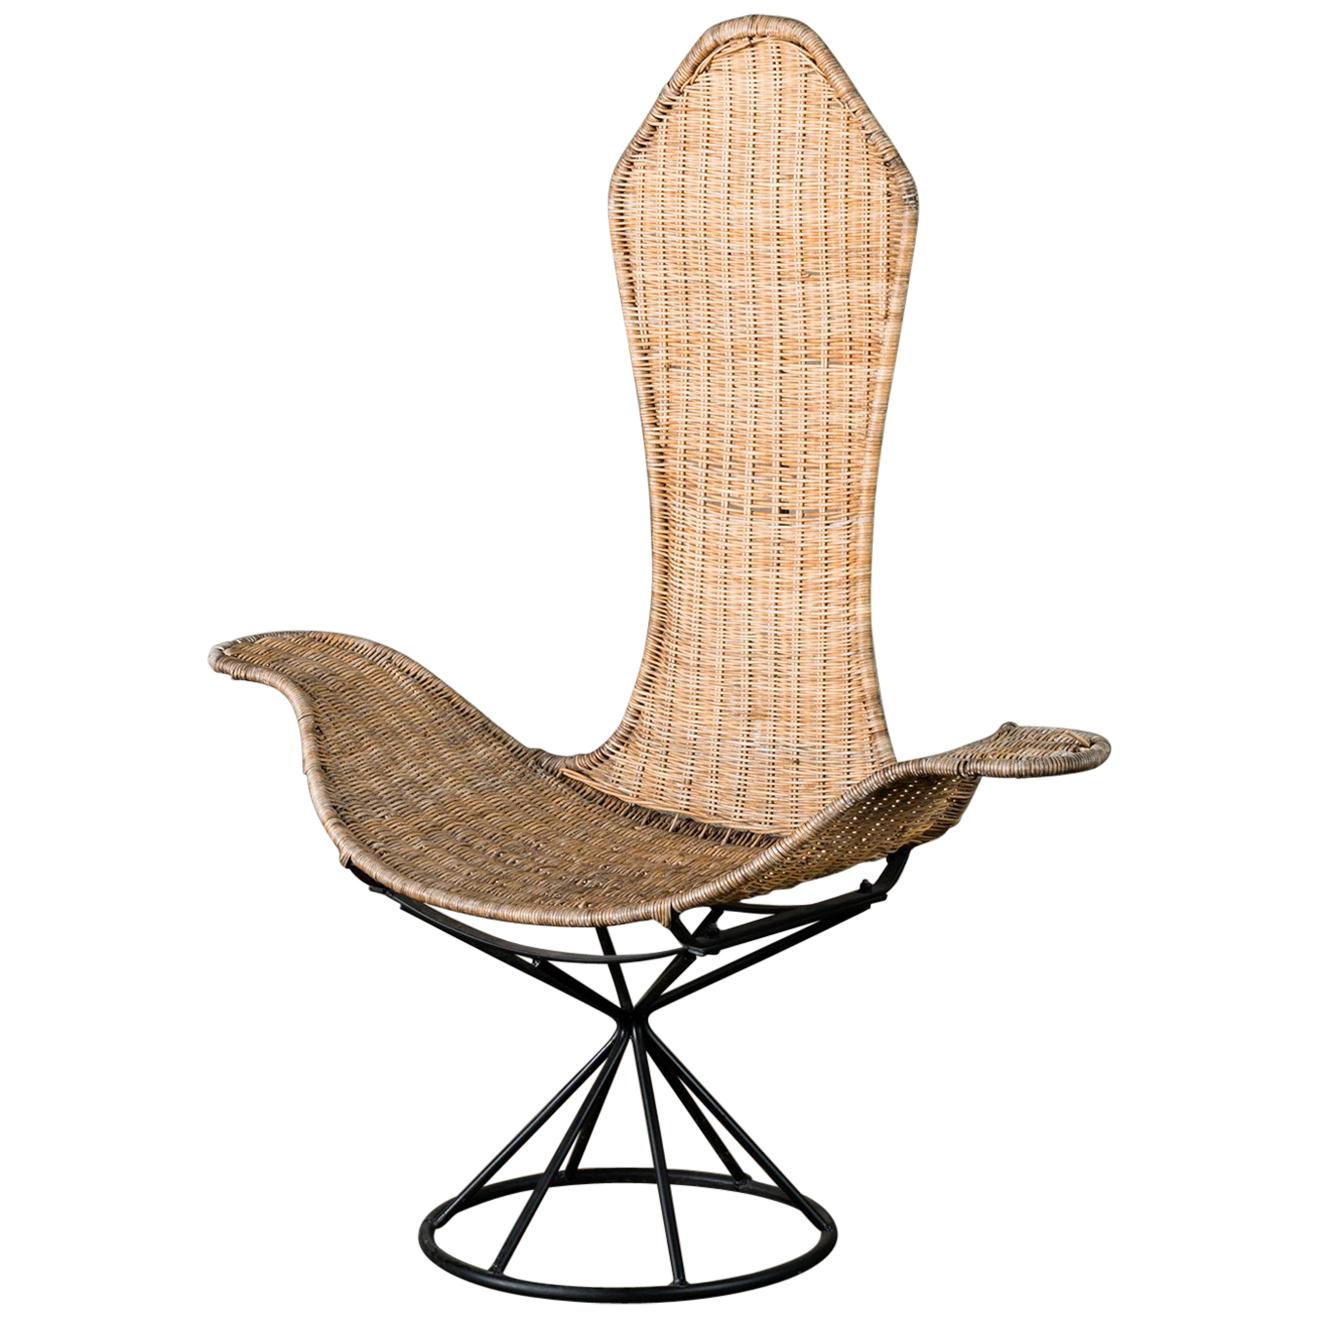 Danny Ho Fong "Wave" Chair